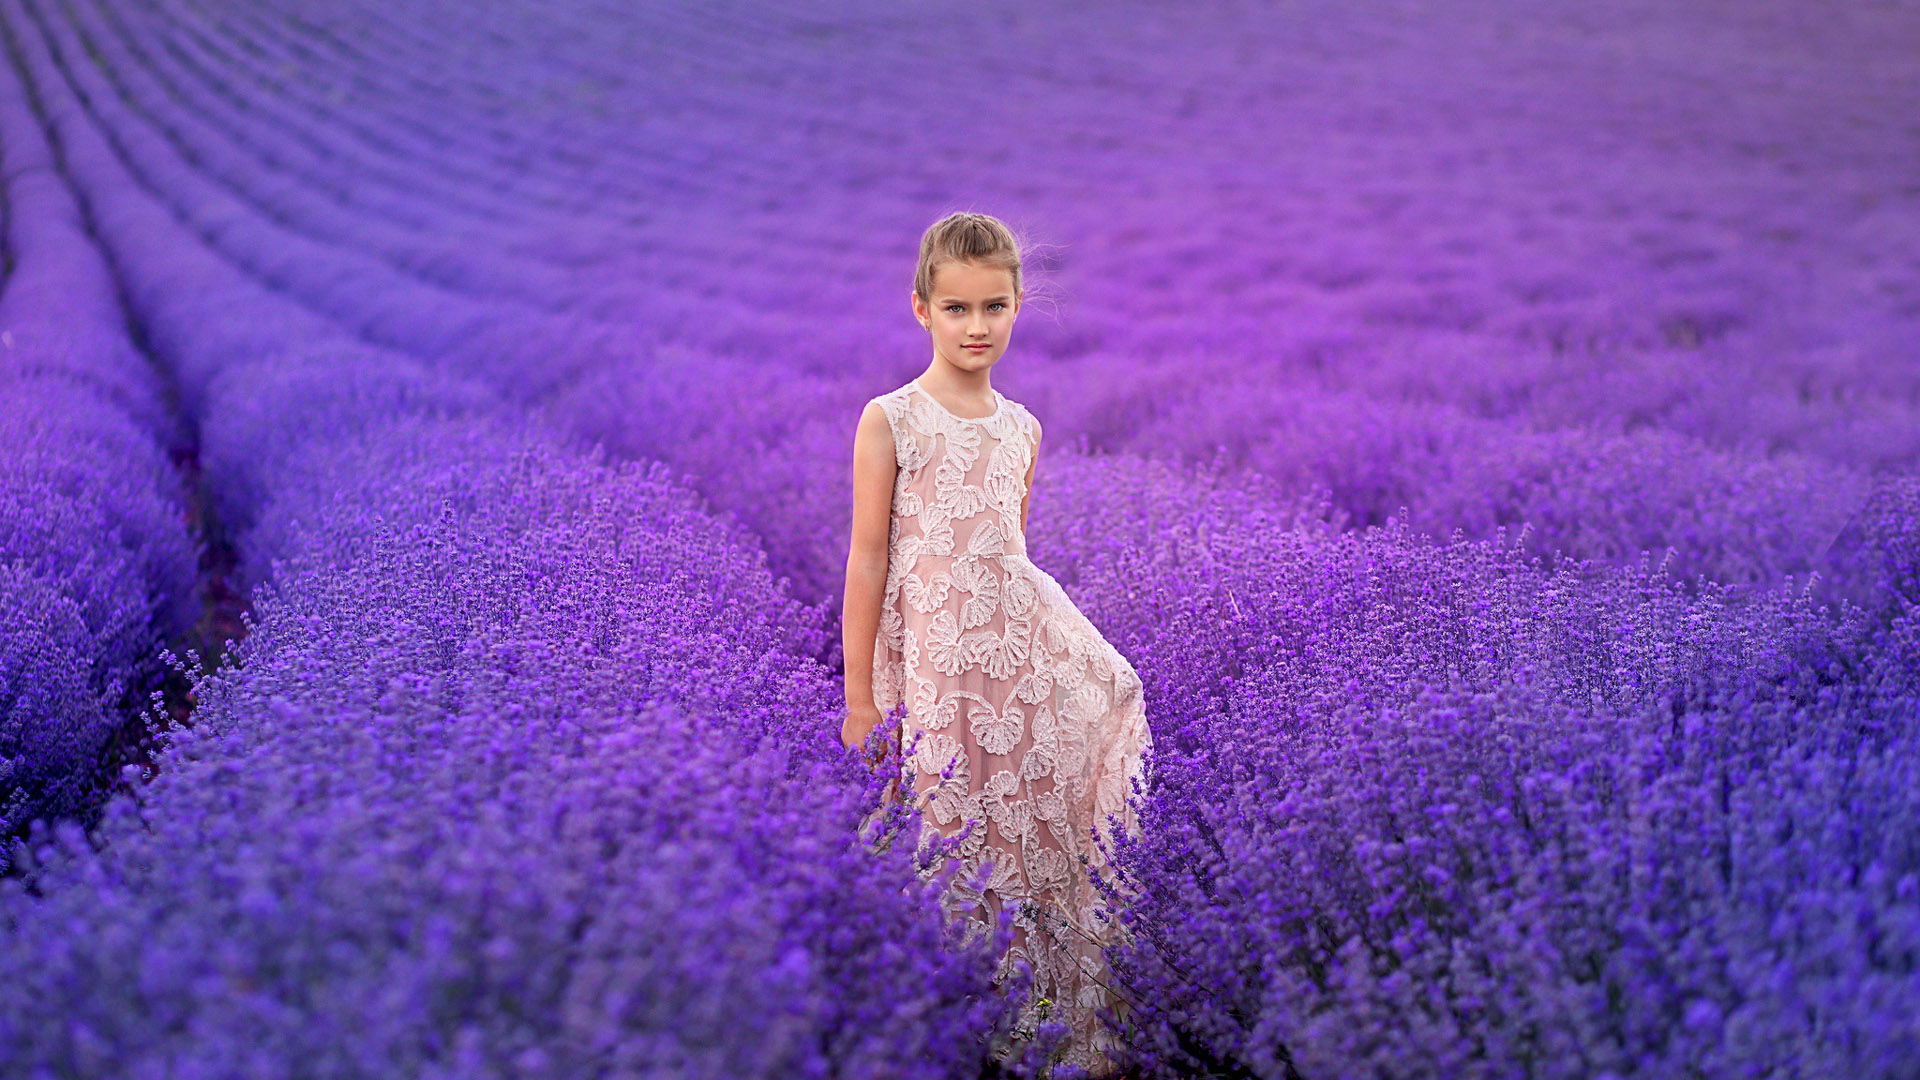 1920x1080 Cute Girl In Lavender Field 1080P Laptop Full HD Wallpaper, HD  Other 4K Wallpapers, Images, Photos and Background - Wallpapers Den